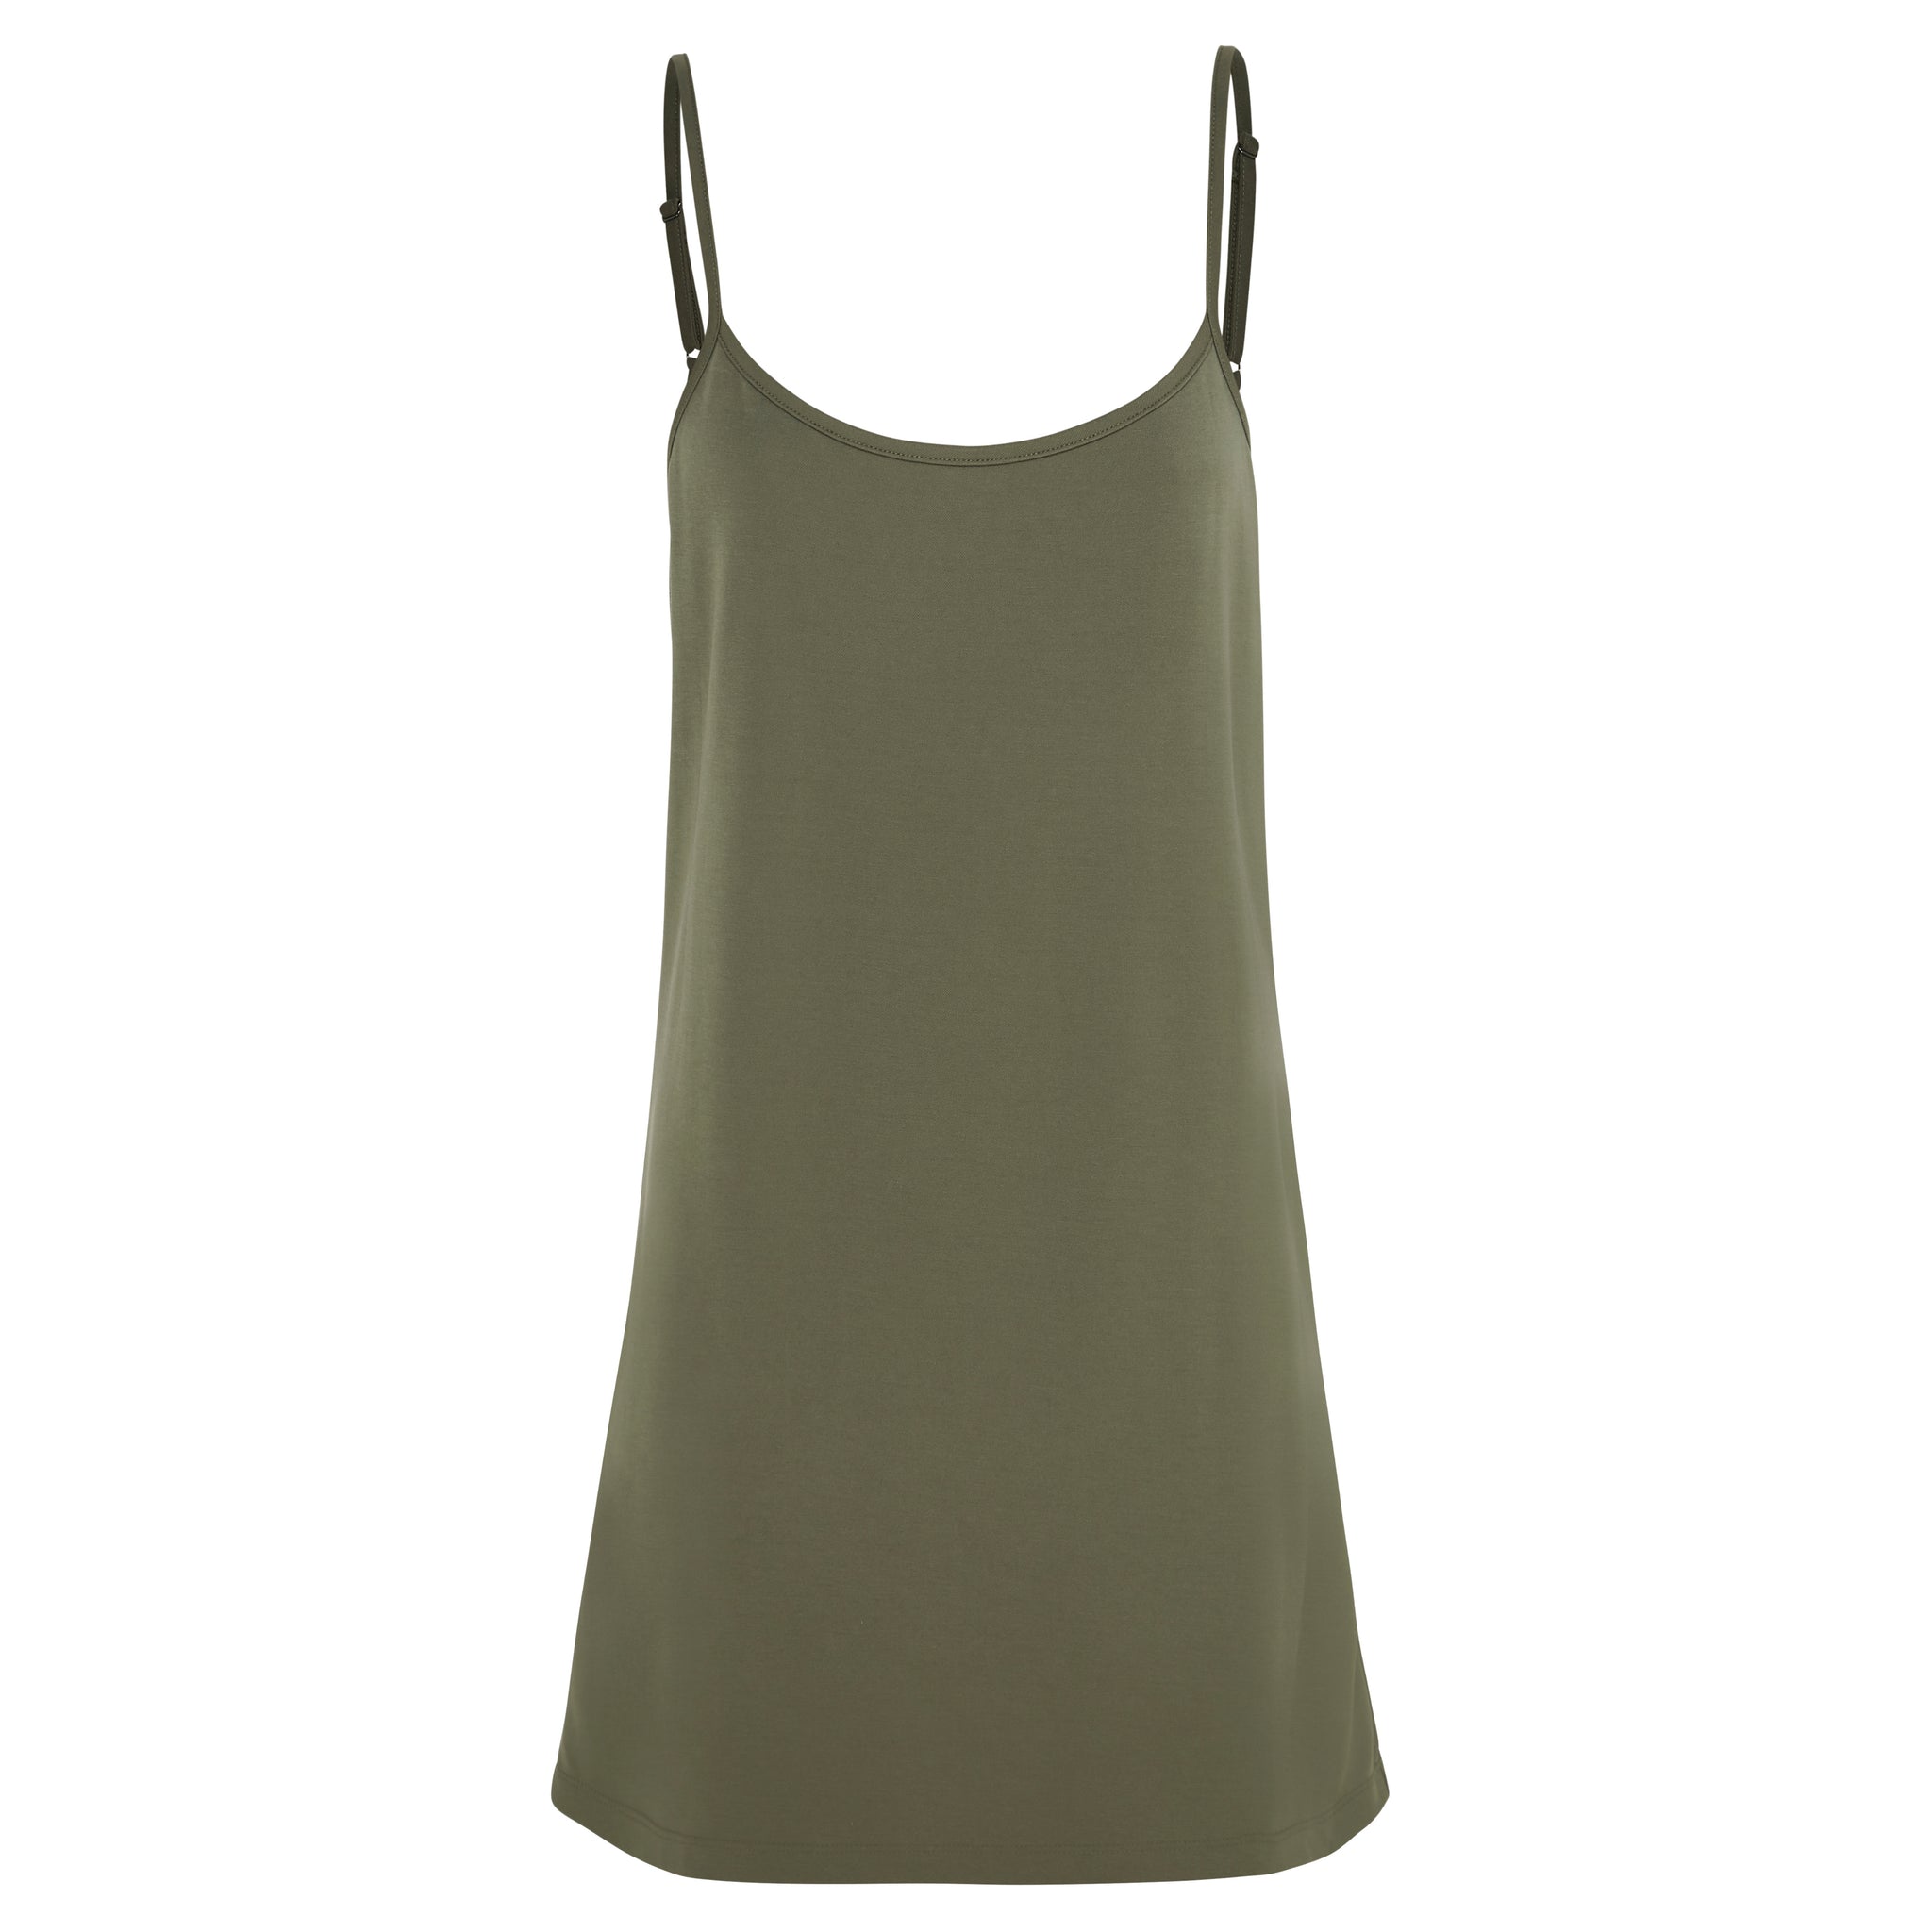 Tyche Longline Cami - Sand Washed Modal Jersey